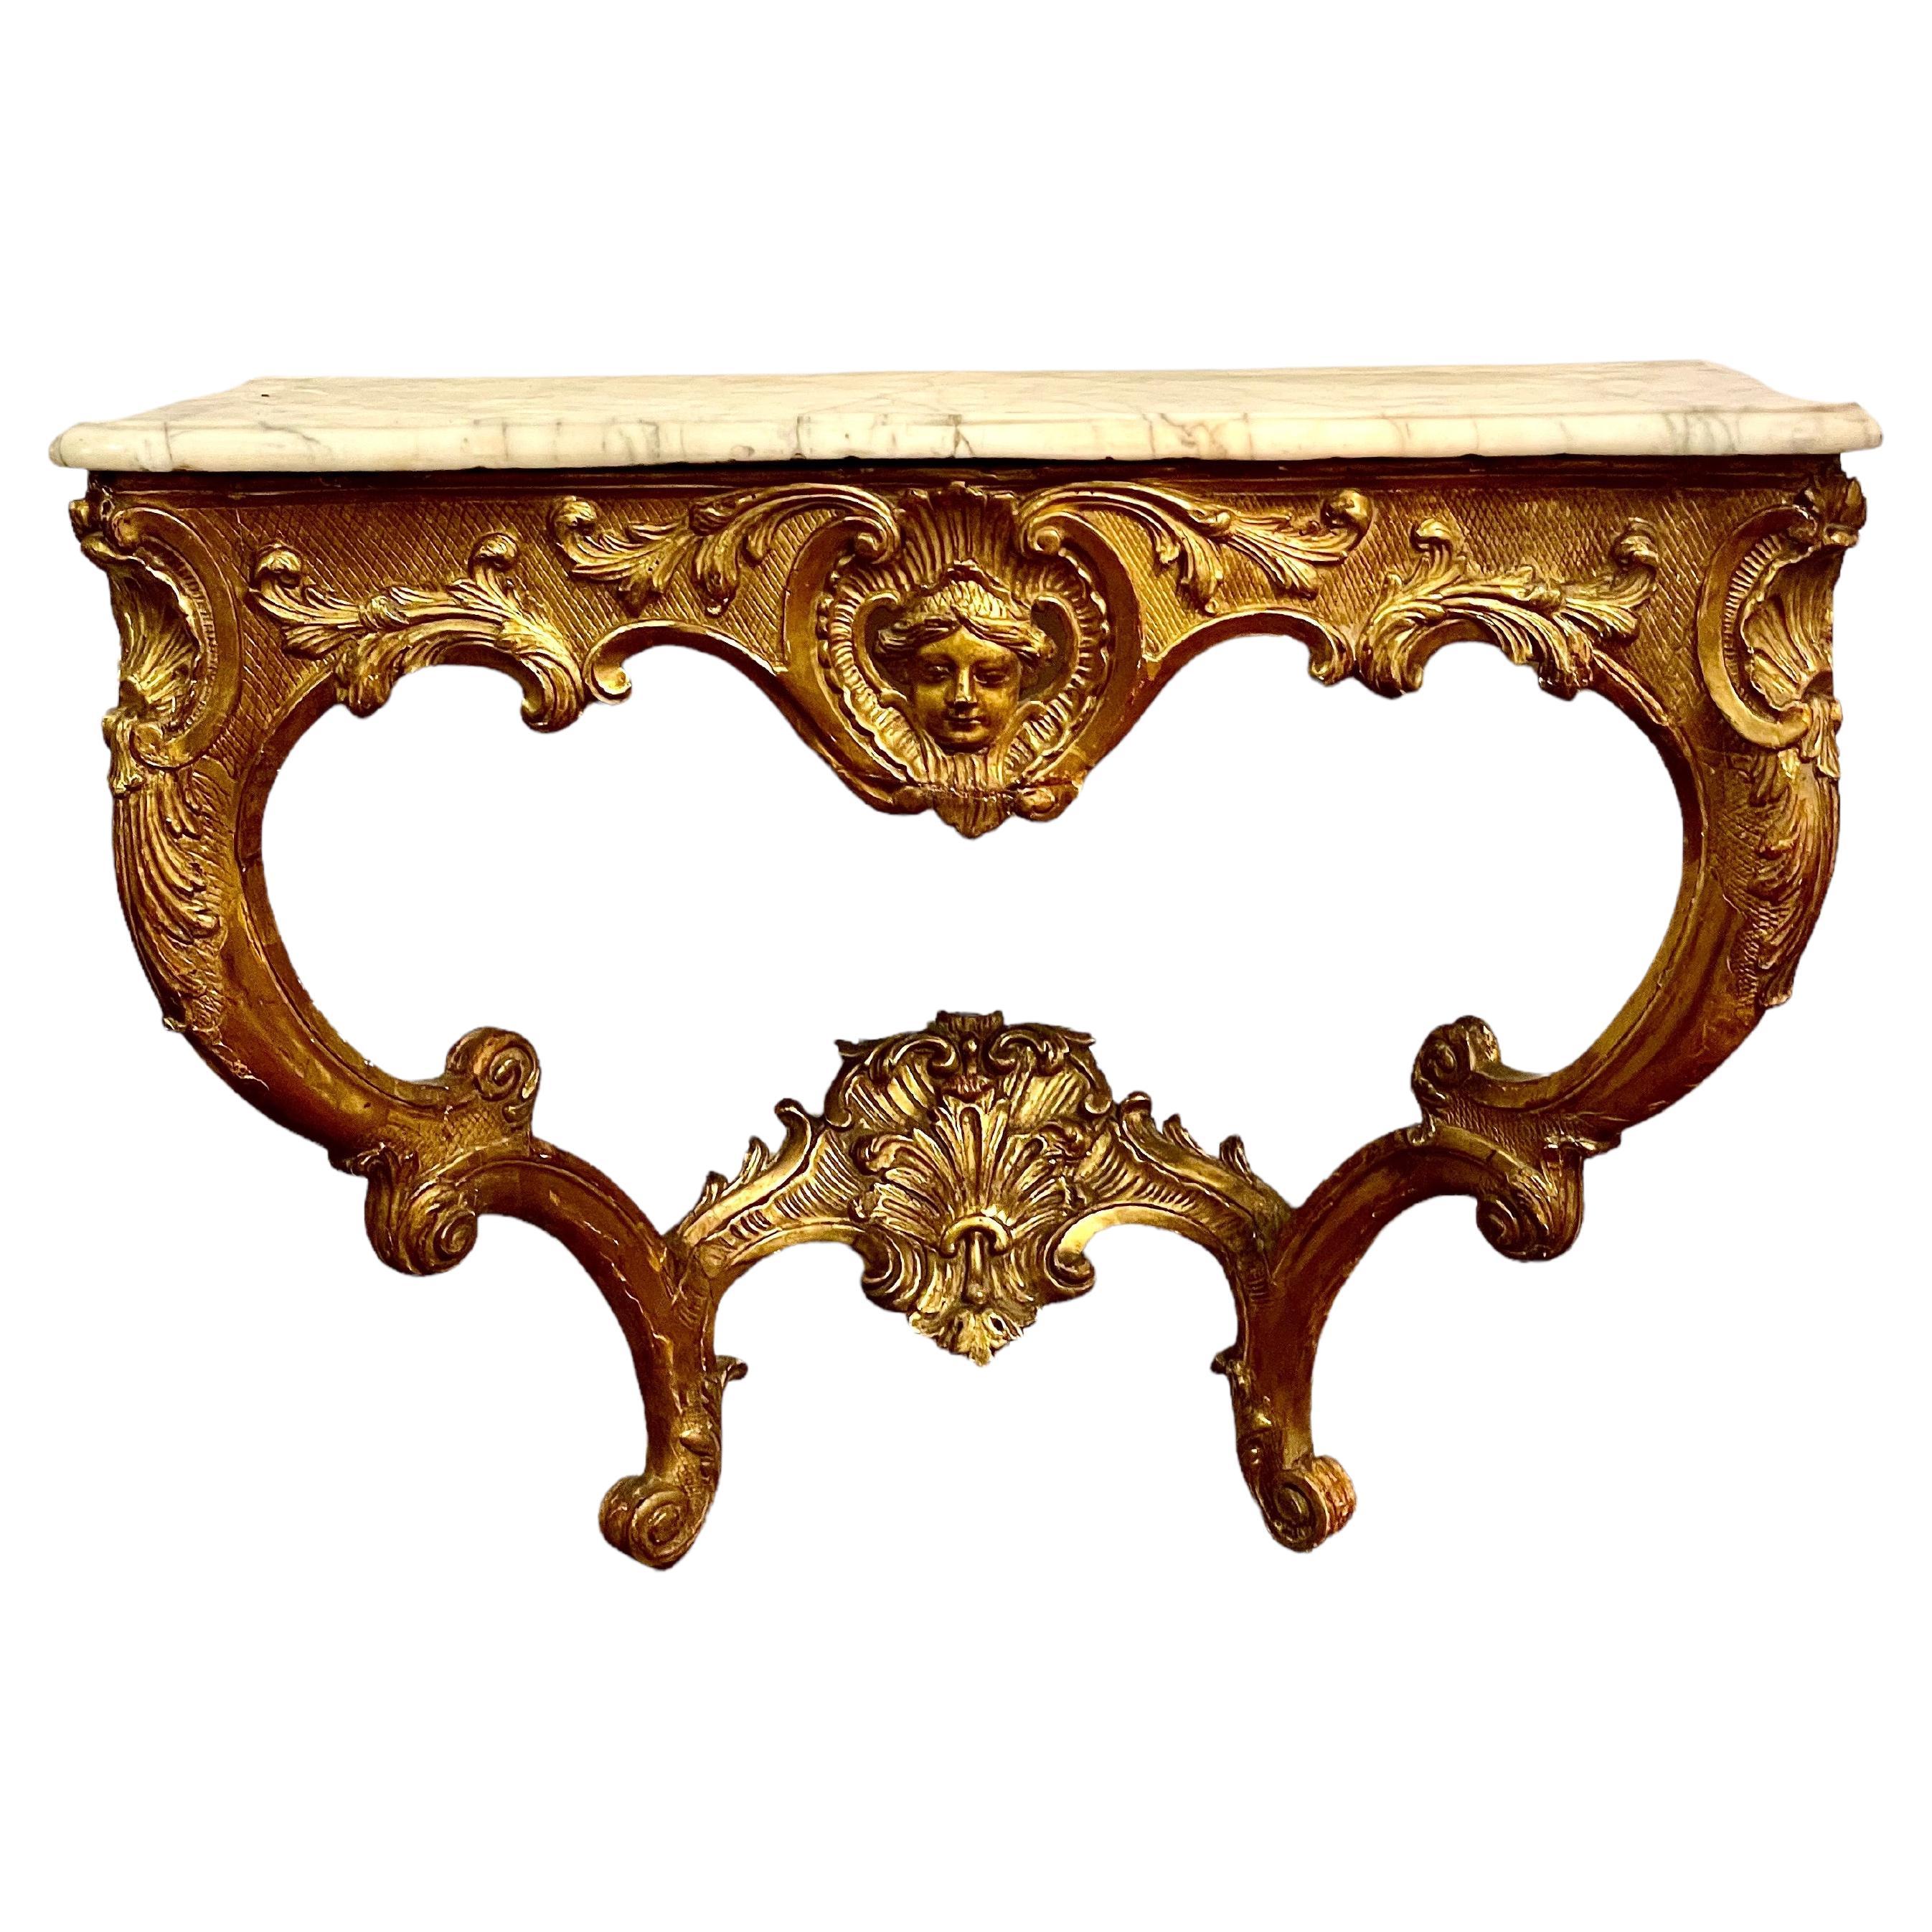 A sublim French Louis XV period Giltwood Console table, with a marble top. 